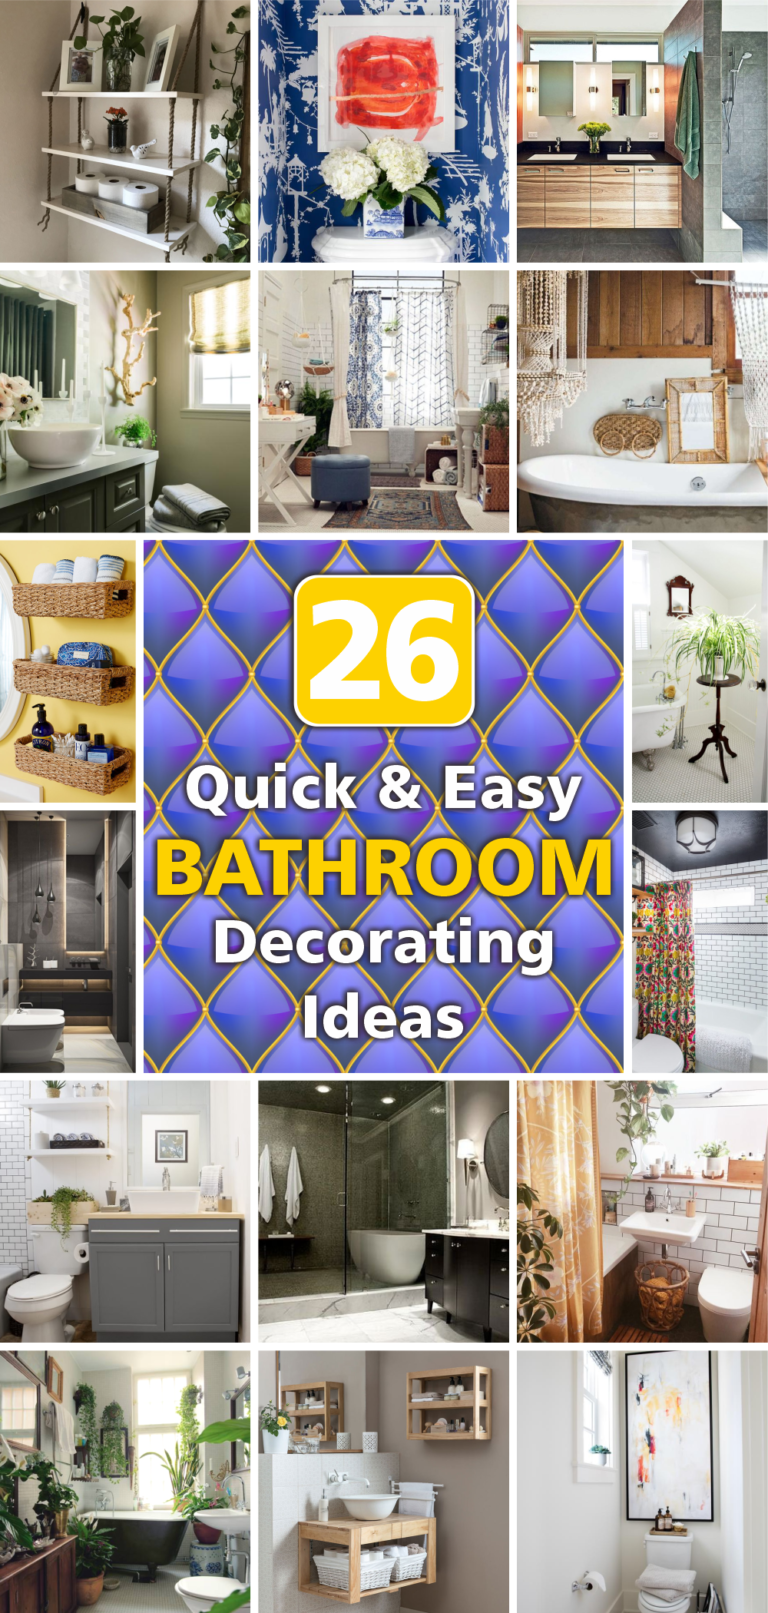 Get a Dazzling Change with 26 Quick and Easy Bathroom Decorating Ideas ...